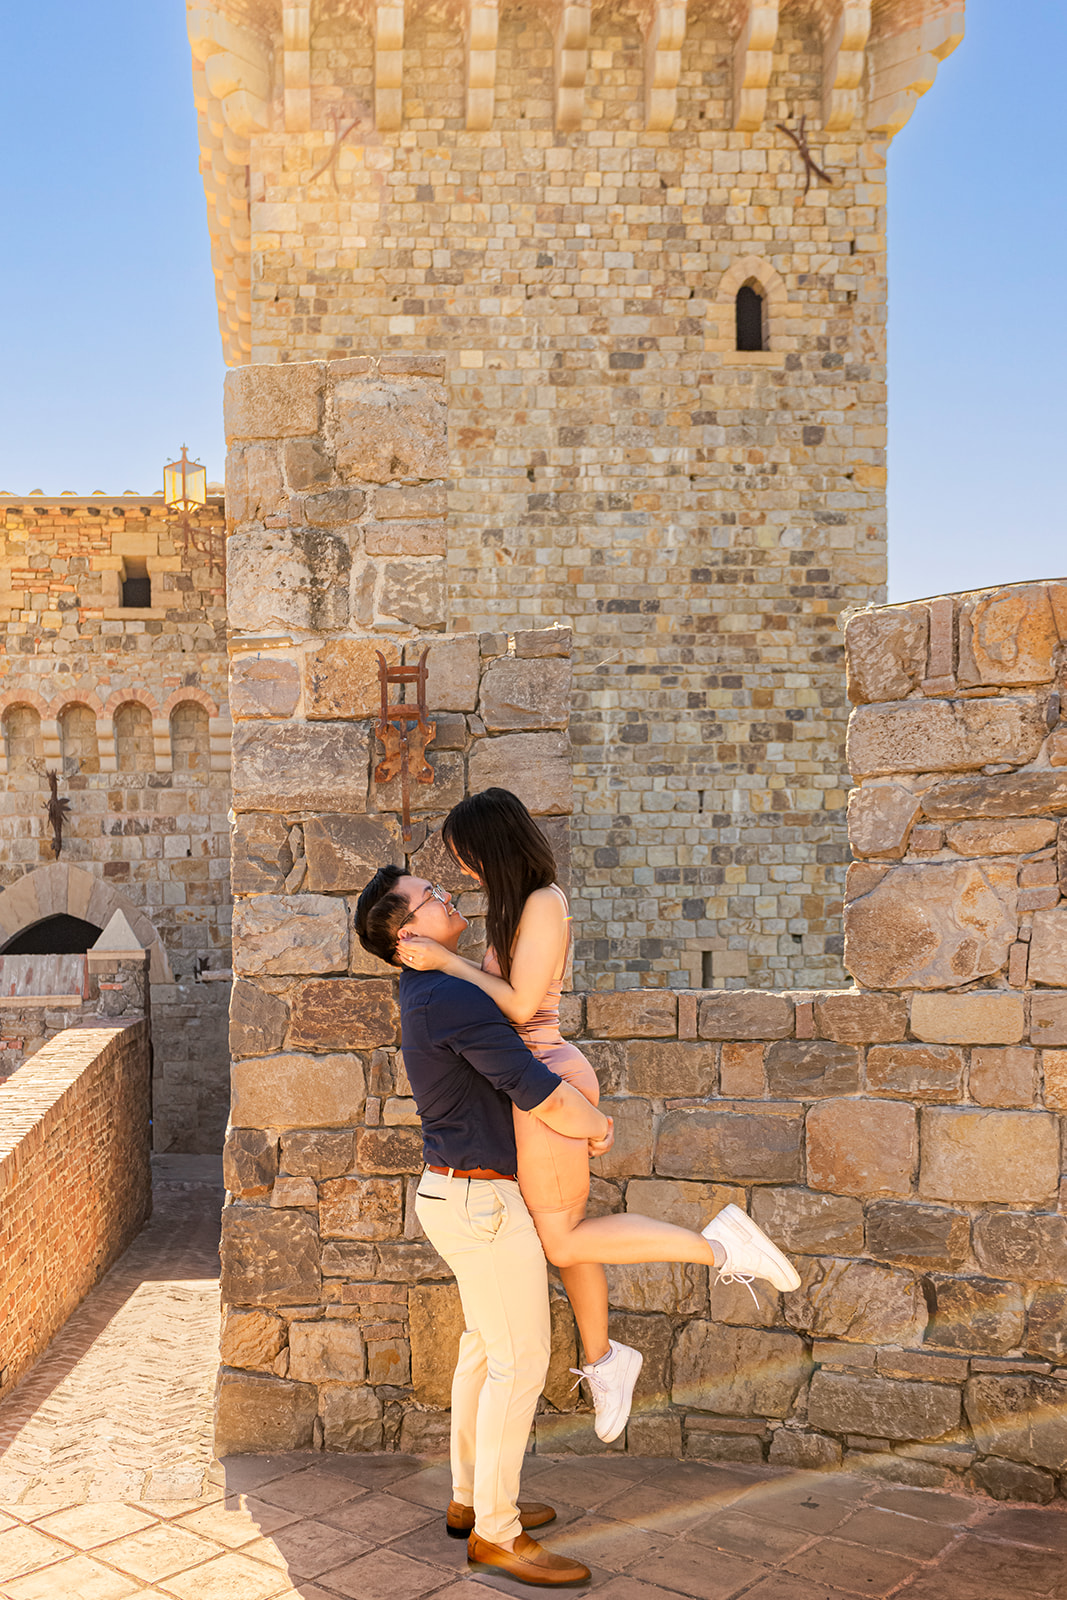 nonbinary person and their fiancée in front of a castle turret